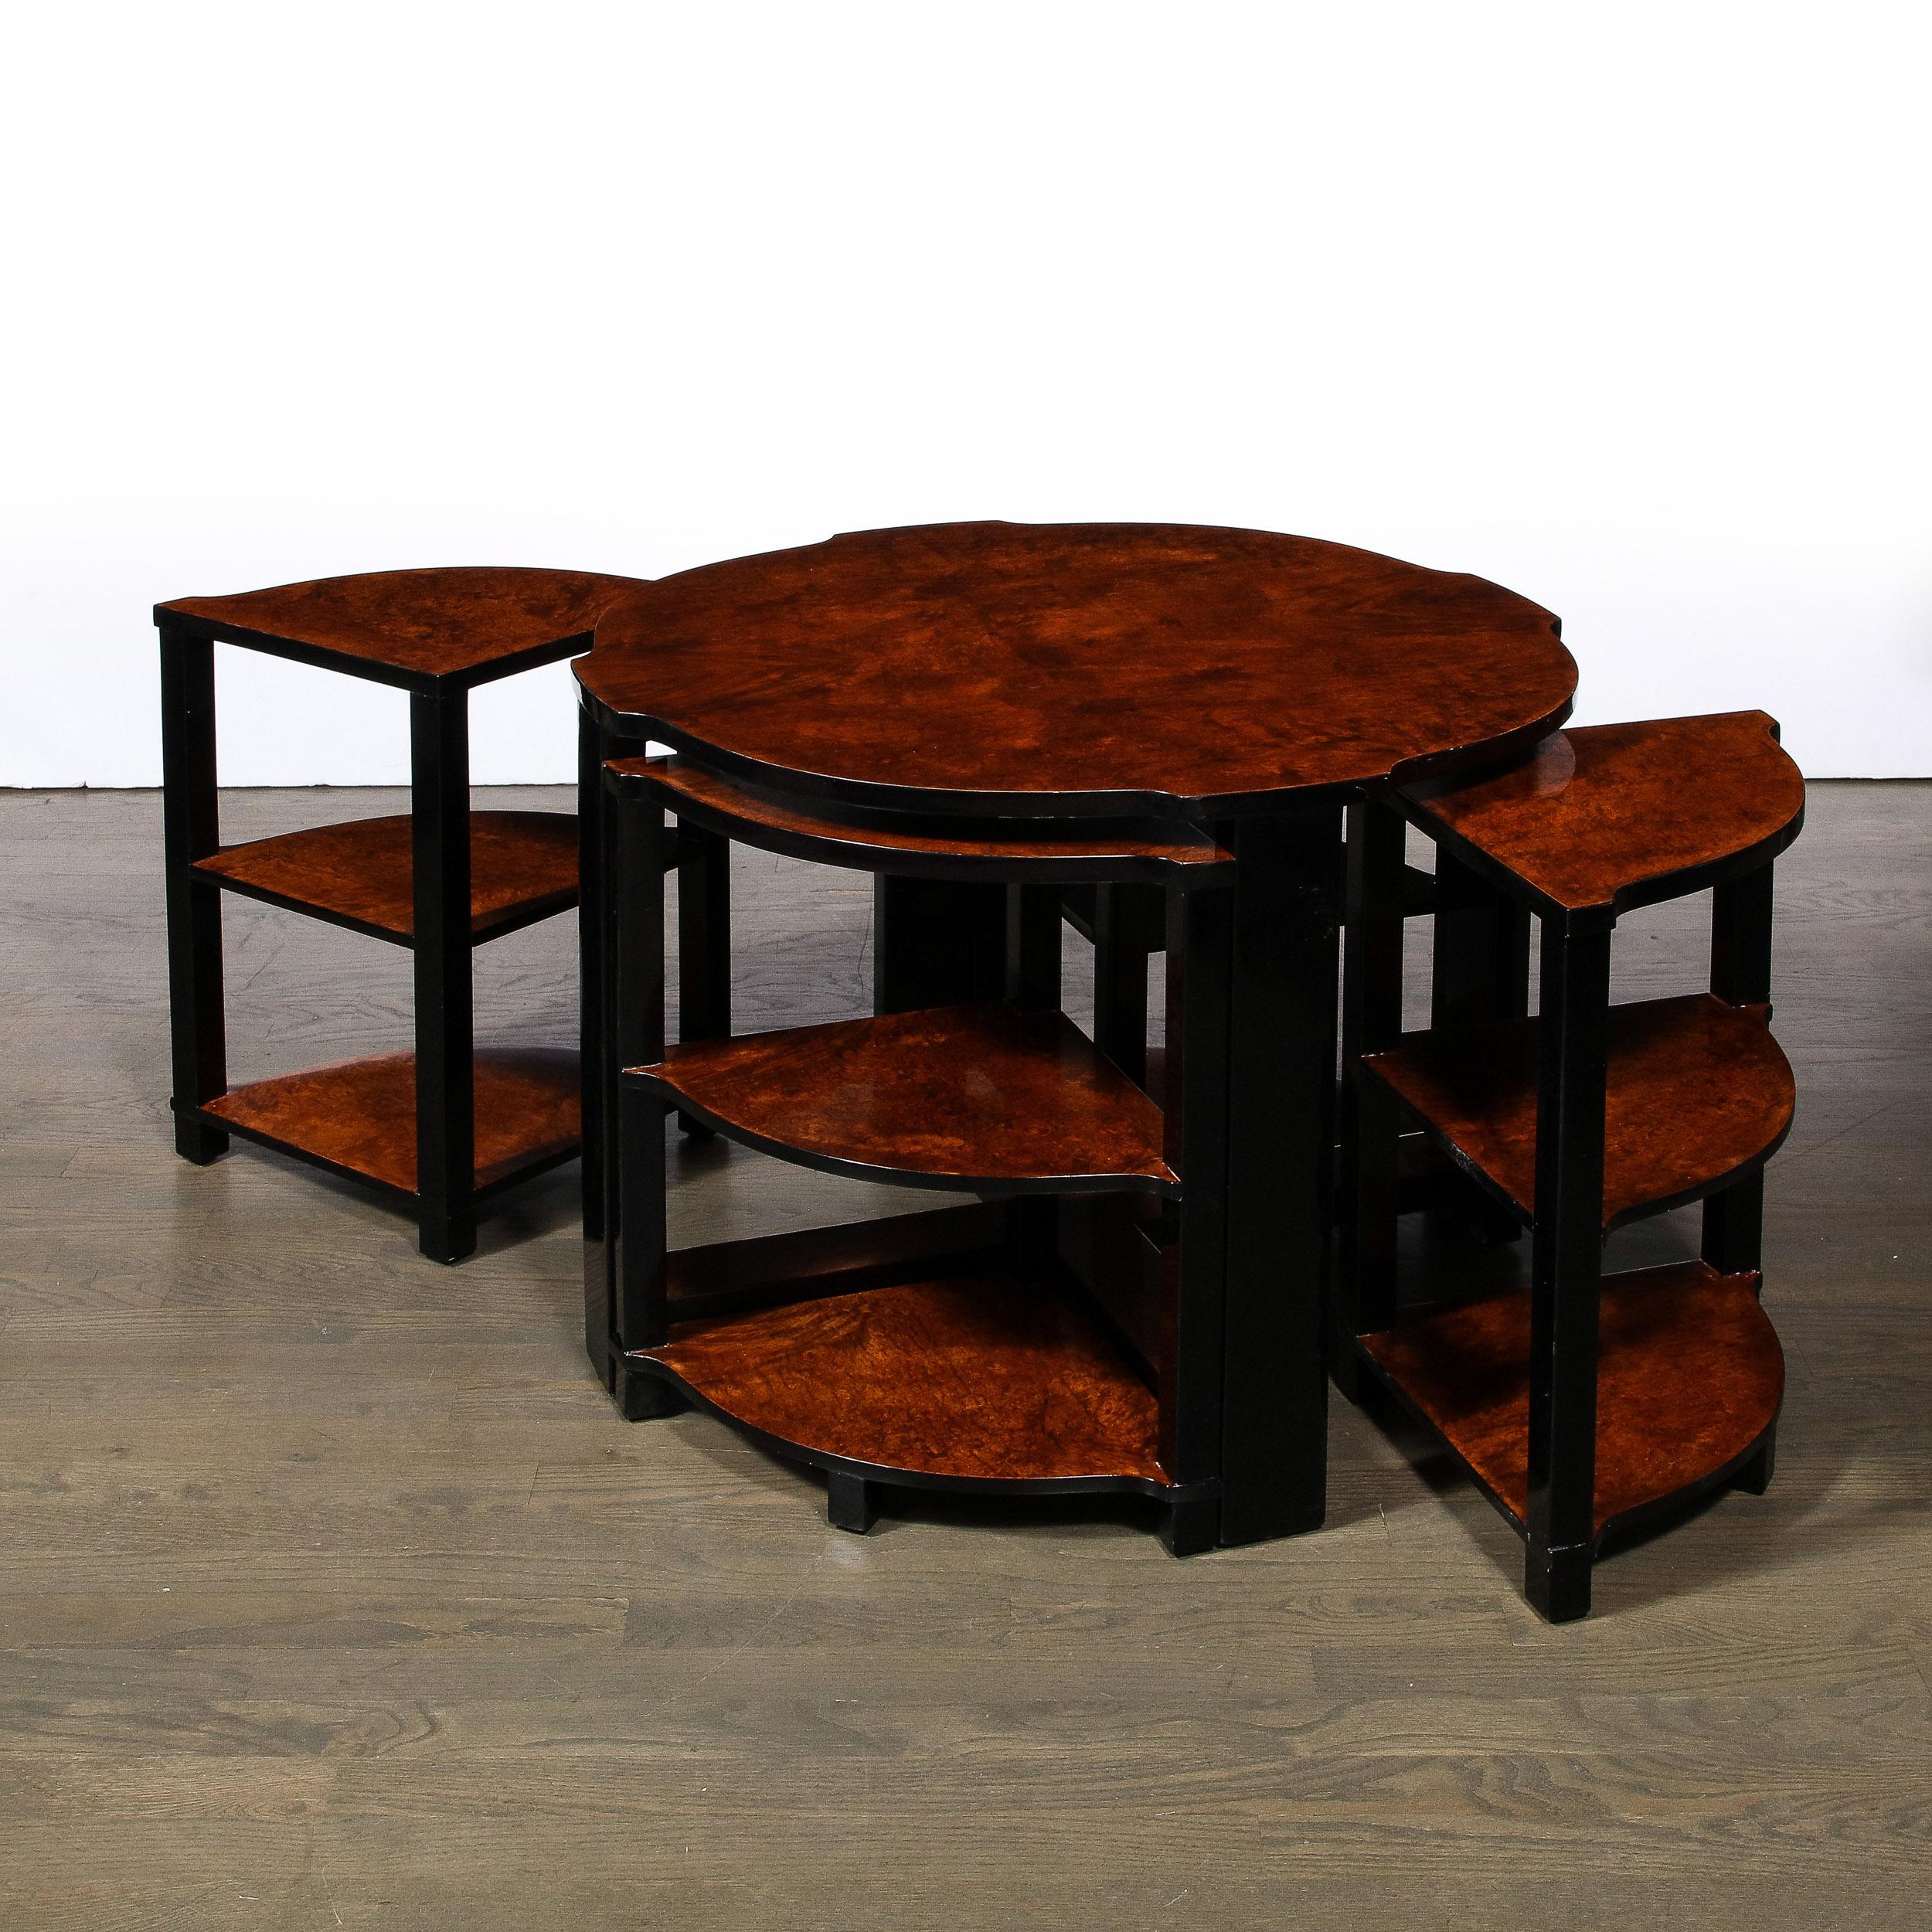 Mid-20th Century Art Deco Three-Tier Occasional Table w/ Four Nested Tables in Bookmatched Walnut